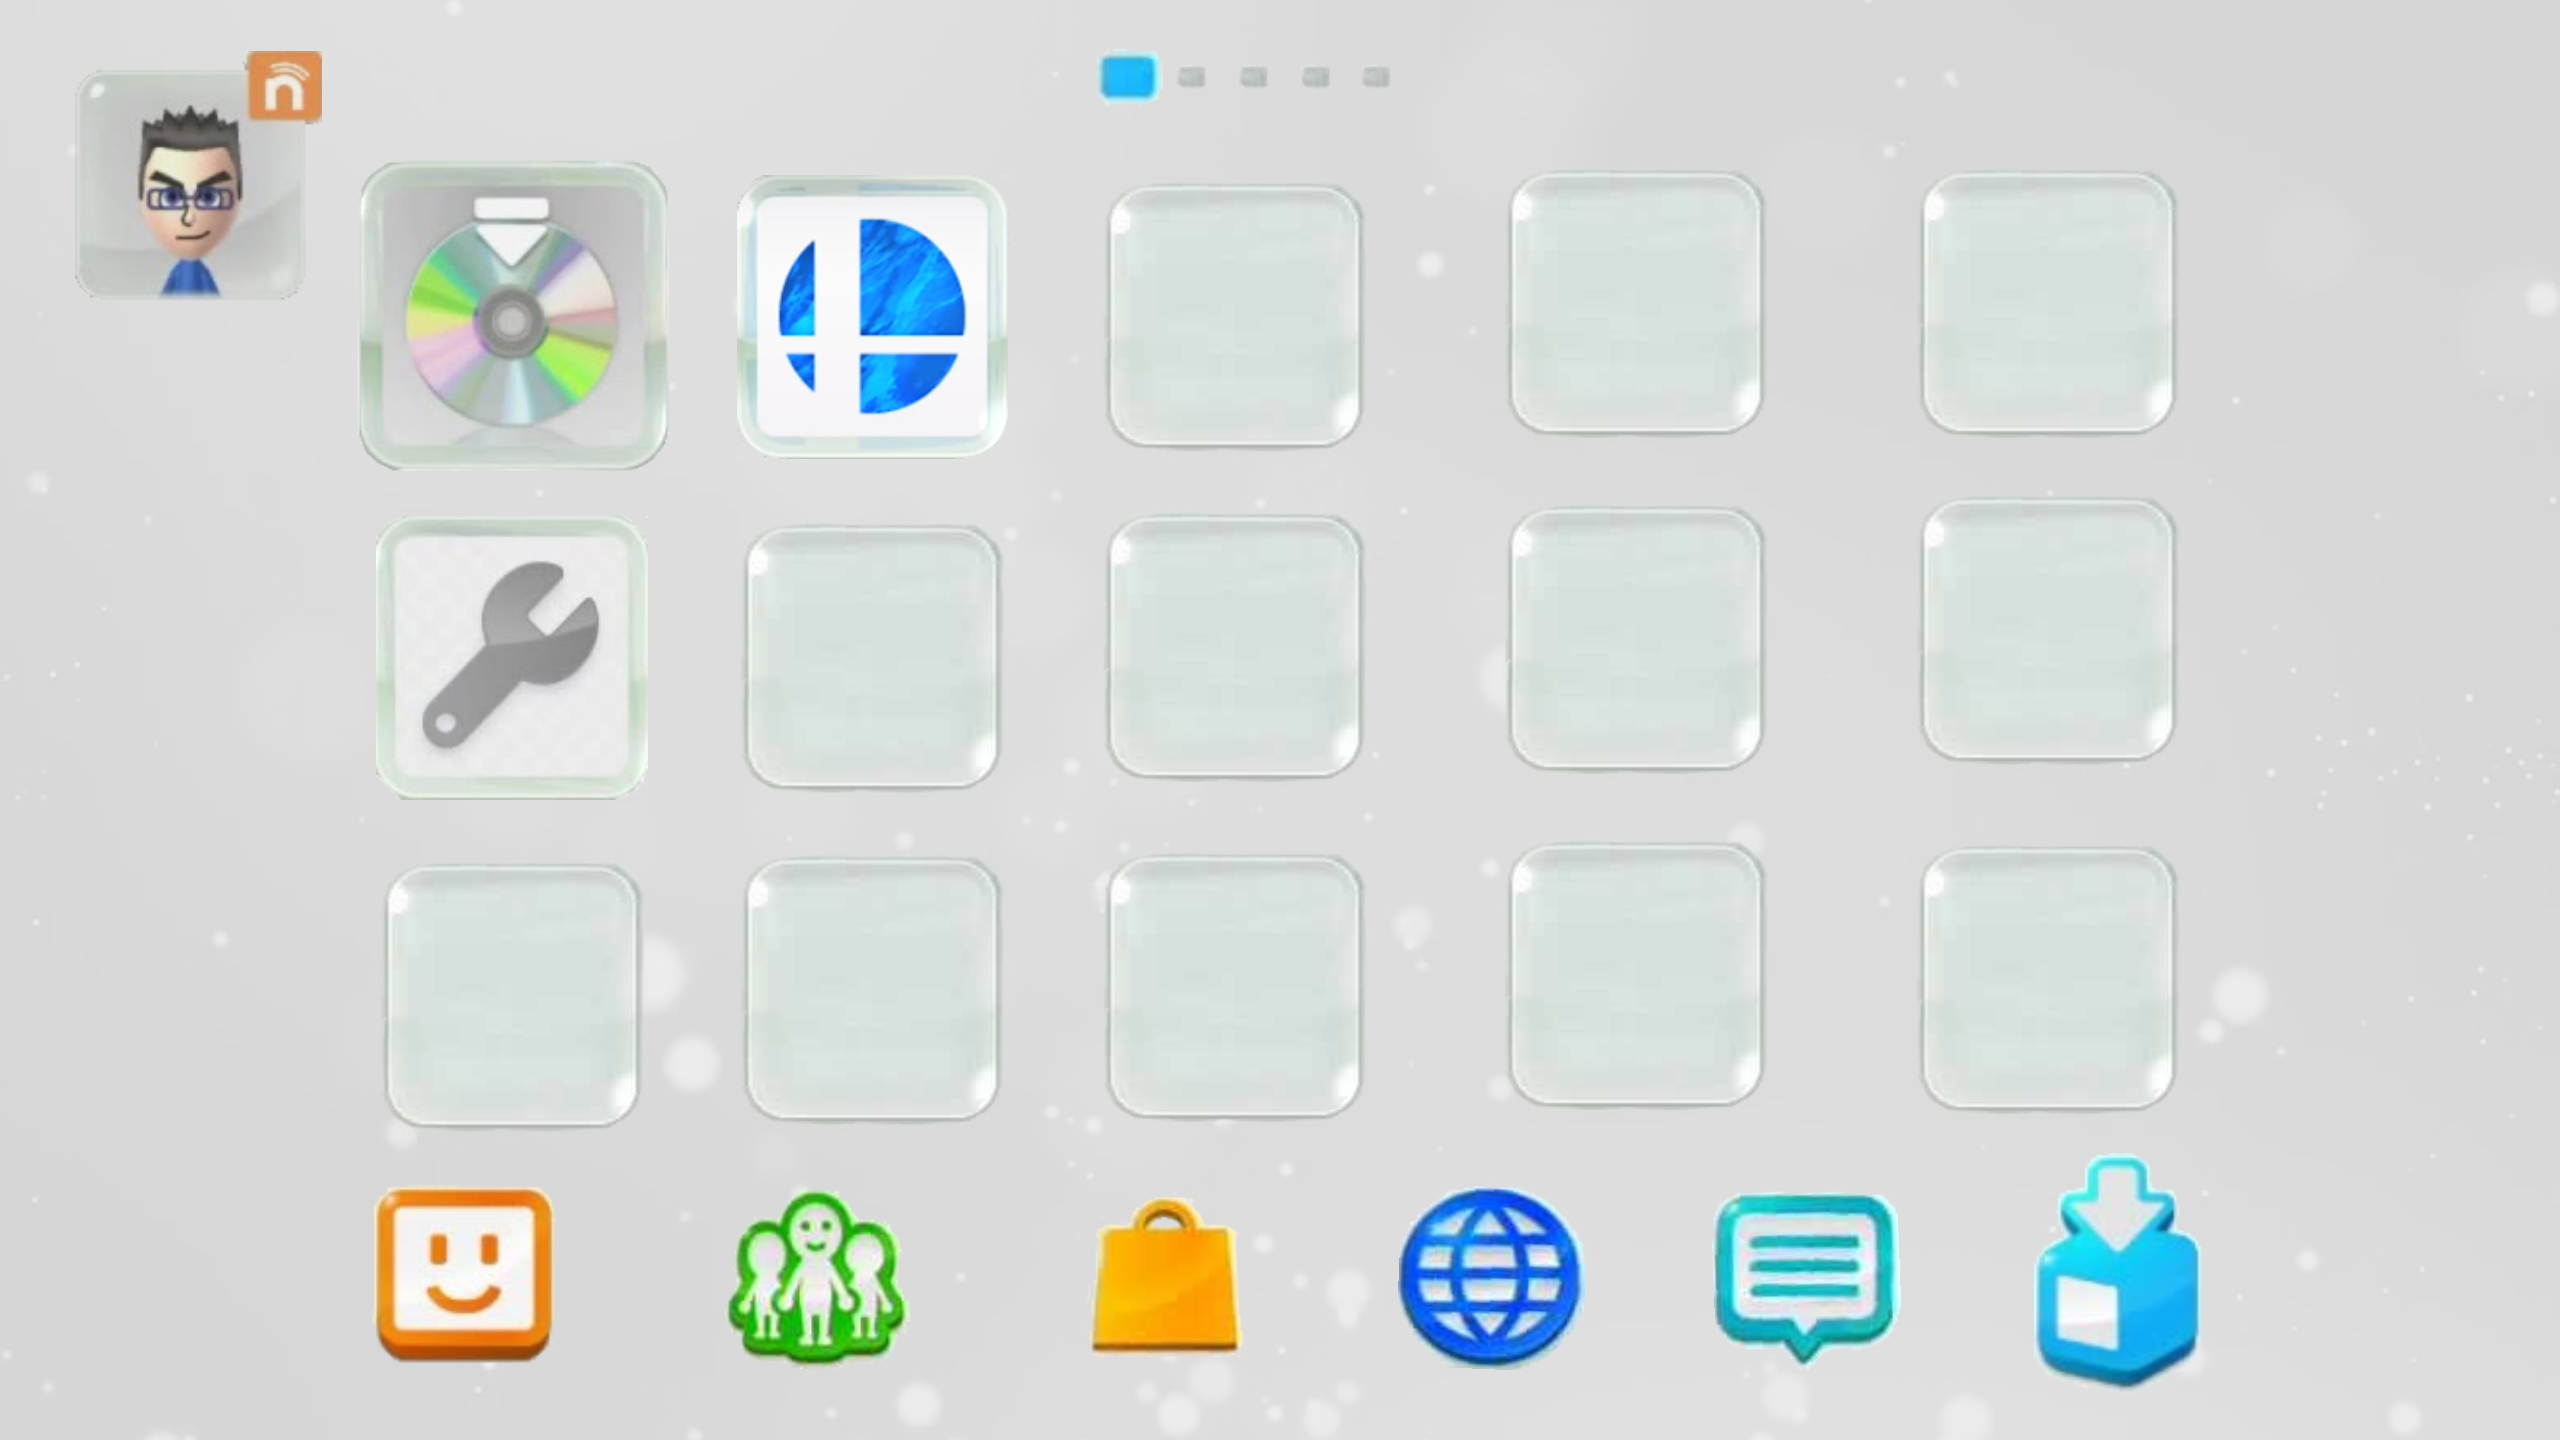 Why Are There No Wii U Emulator Android or iOS Options? 